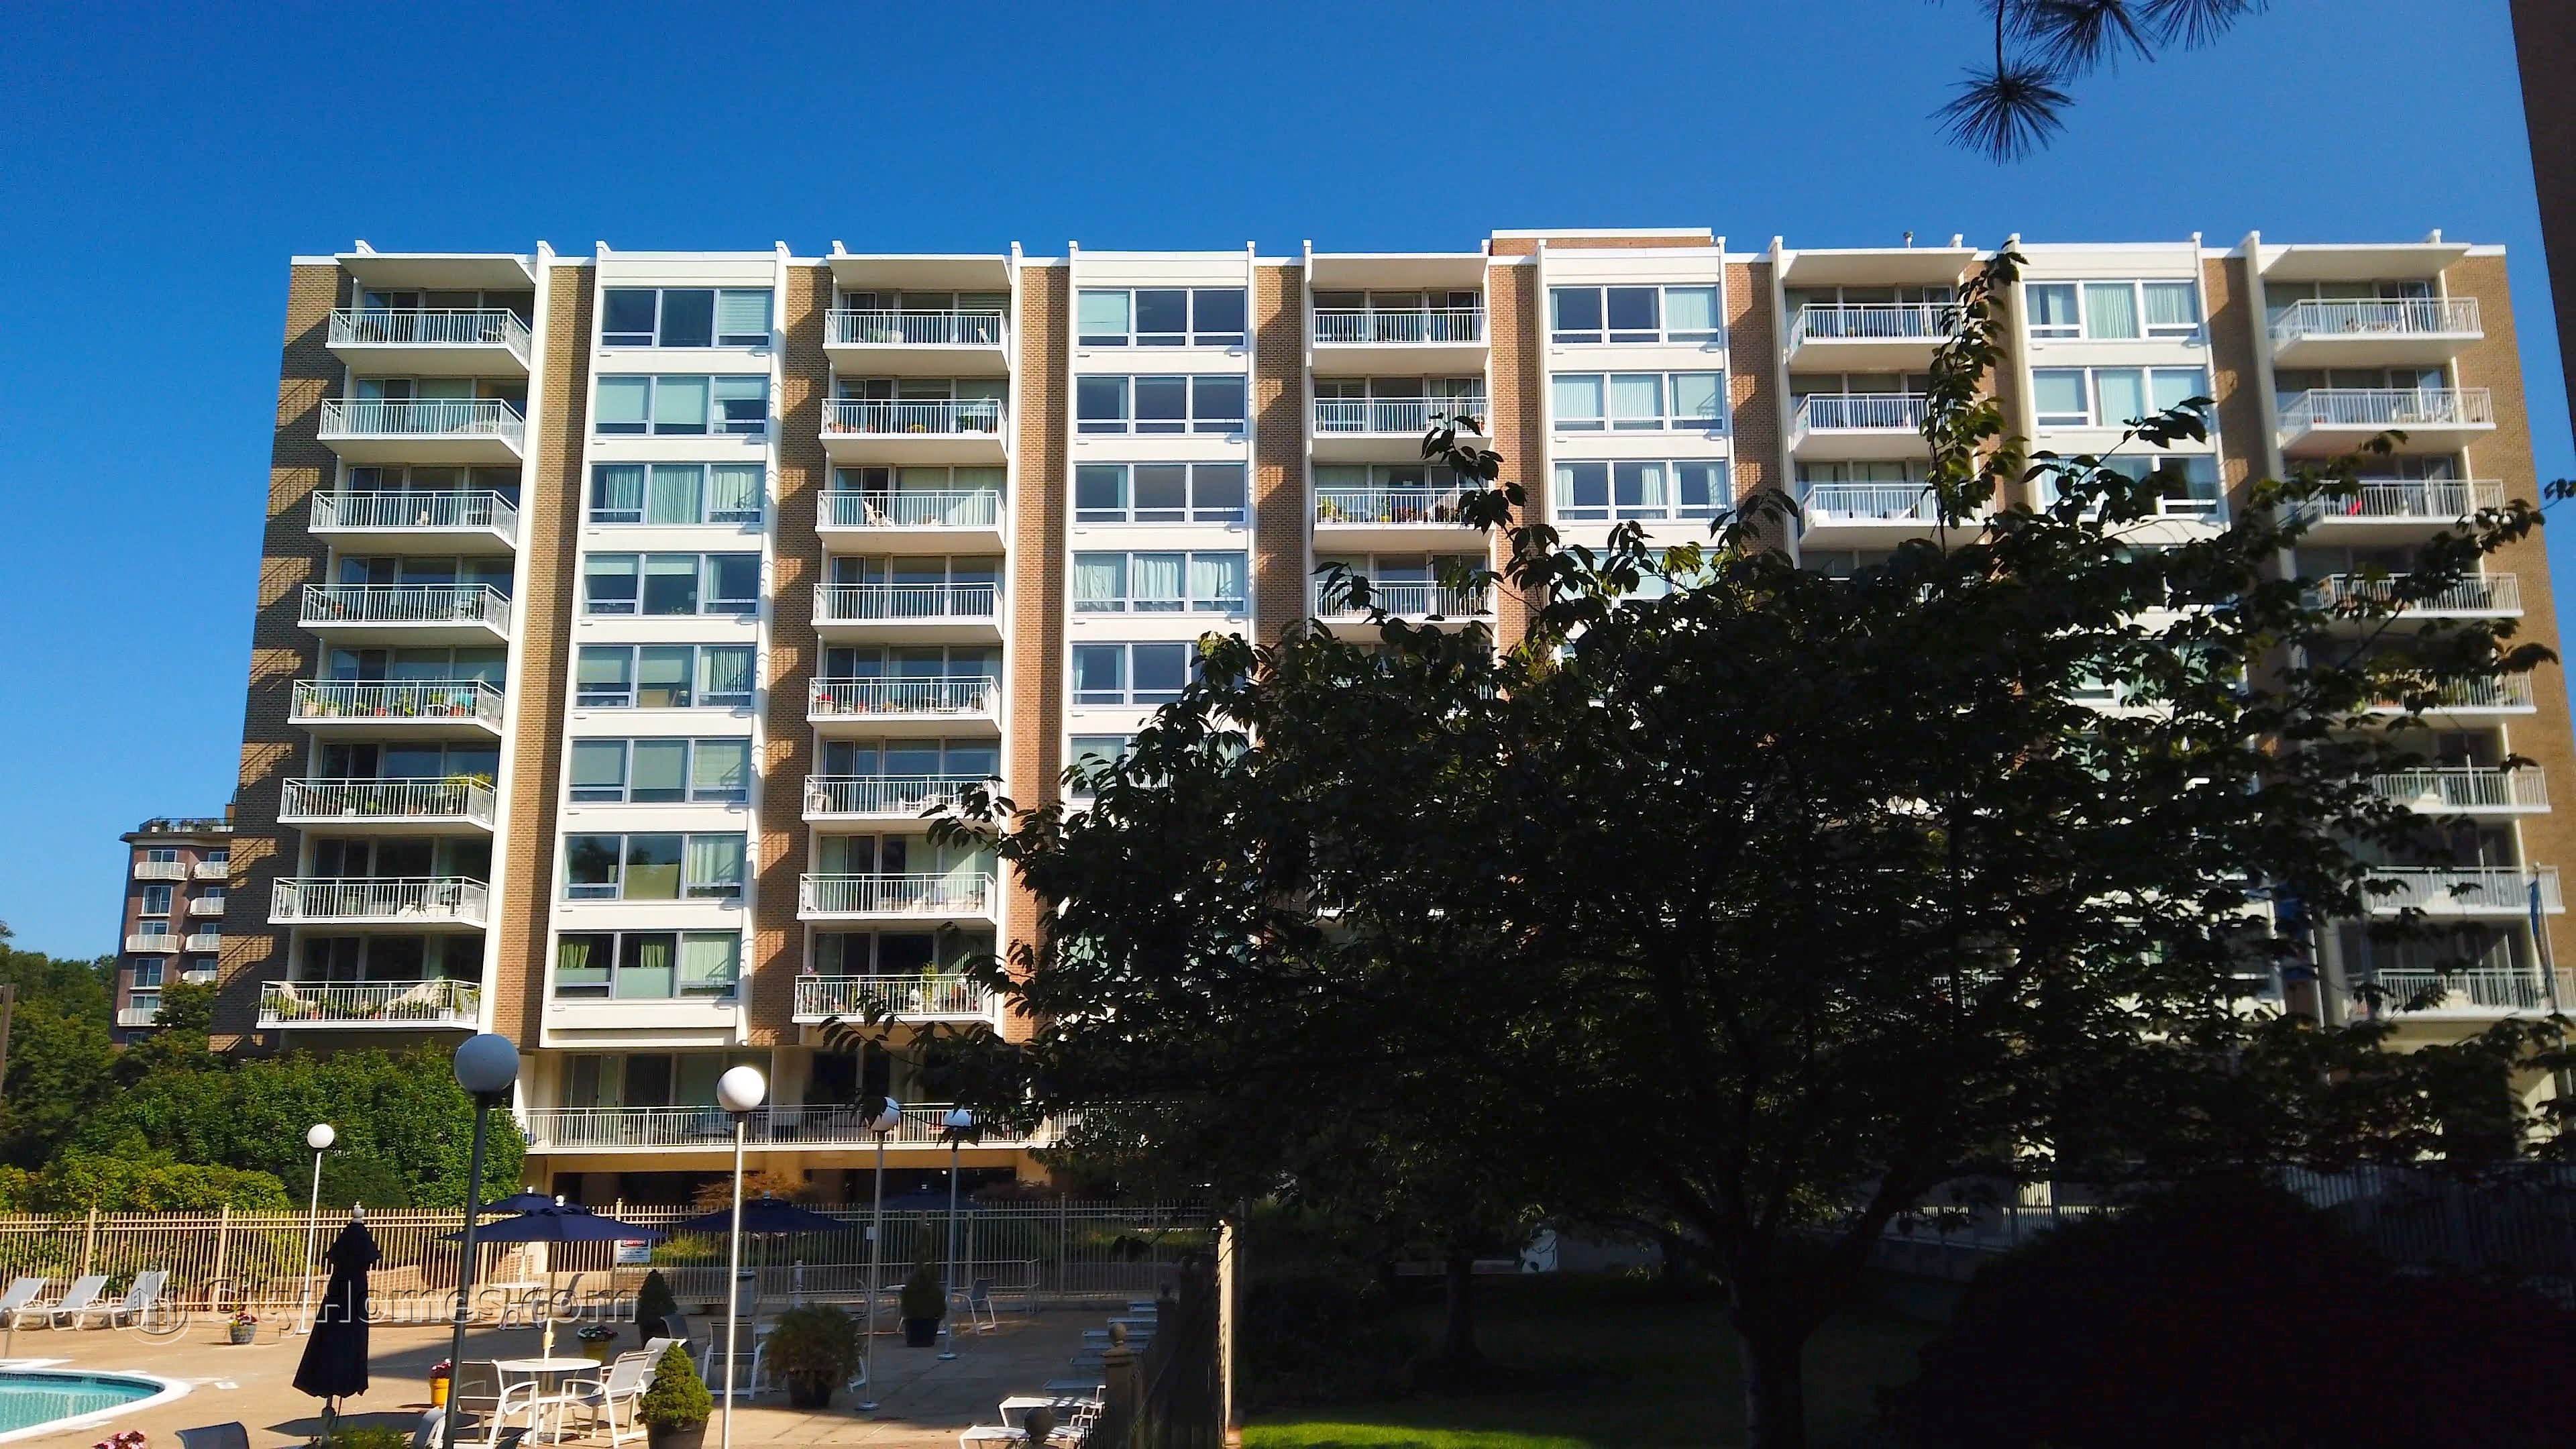 2. Riverside Condominiums building at 1425 & 1435 4th St NW, Southwest / Waterfront, Washington, DC 20024